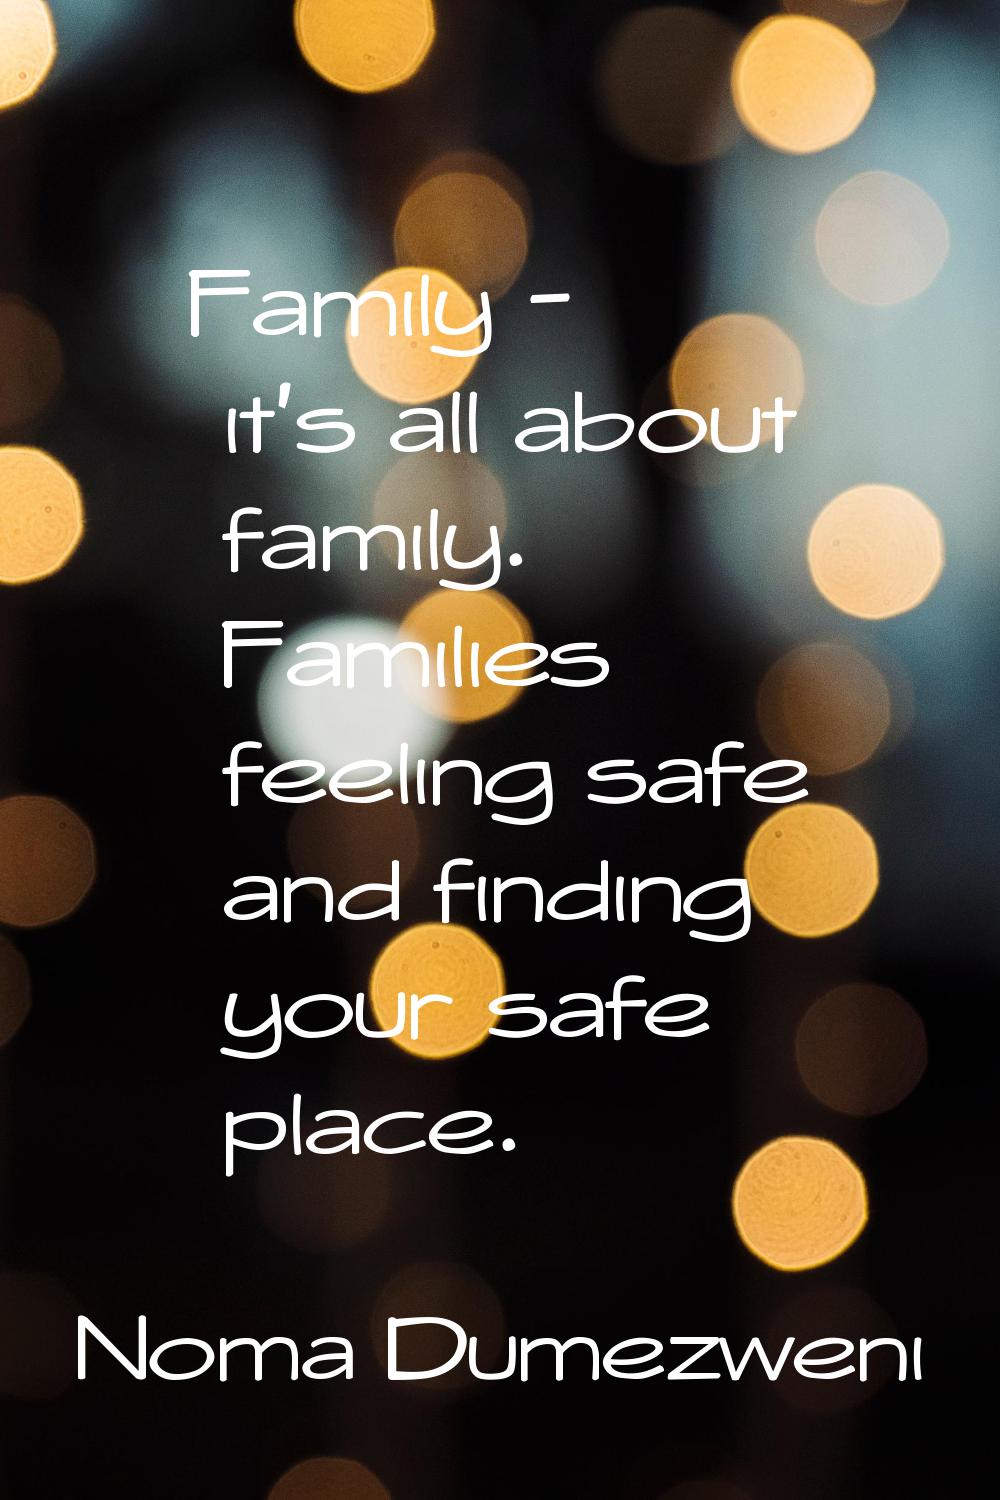 Family - it's all about family. Families feeling safe and finding your safe place.